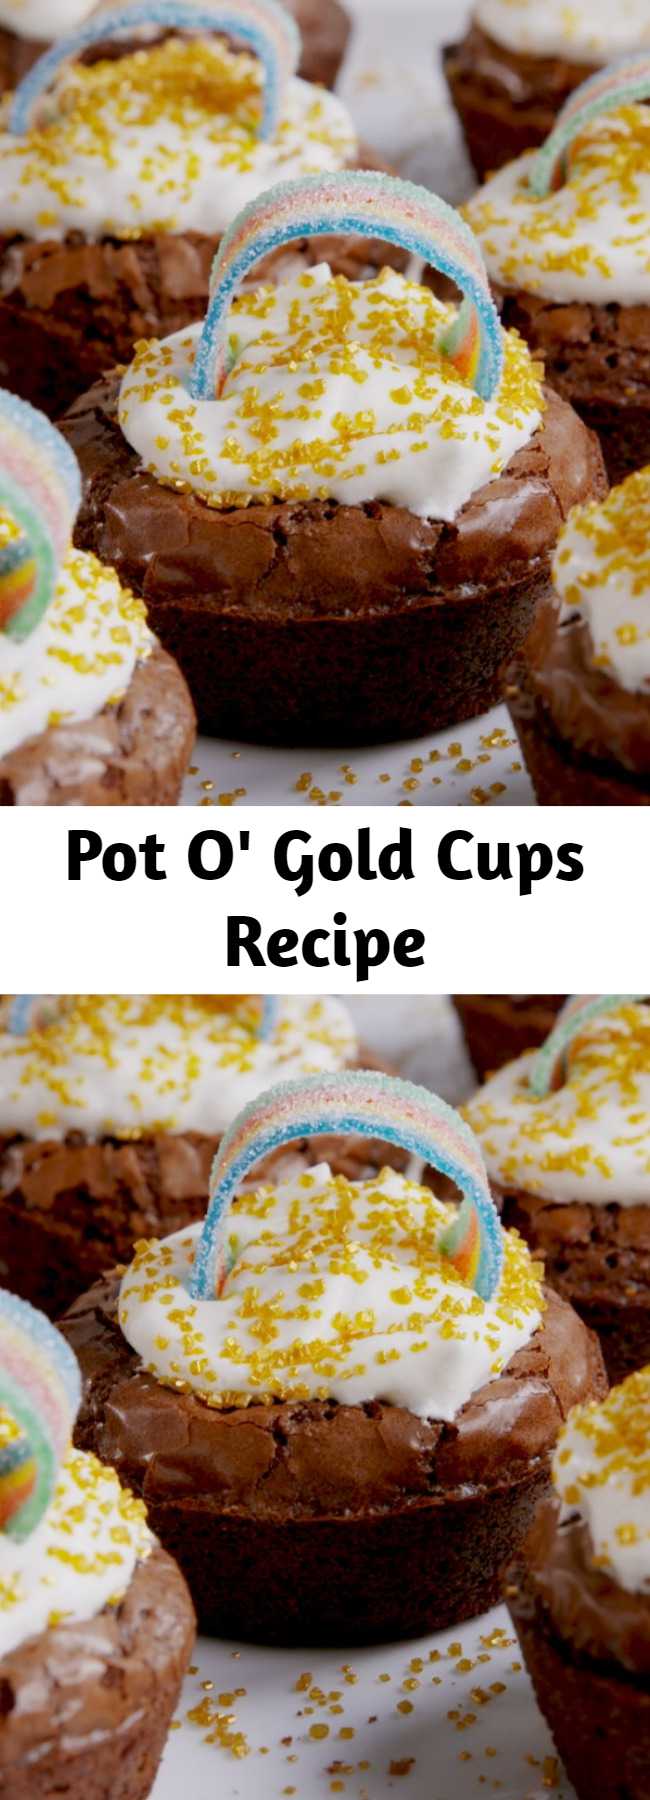 Pot O' Gold Cups Recipe - Pop these little brownies in your mouth for good luck.